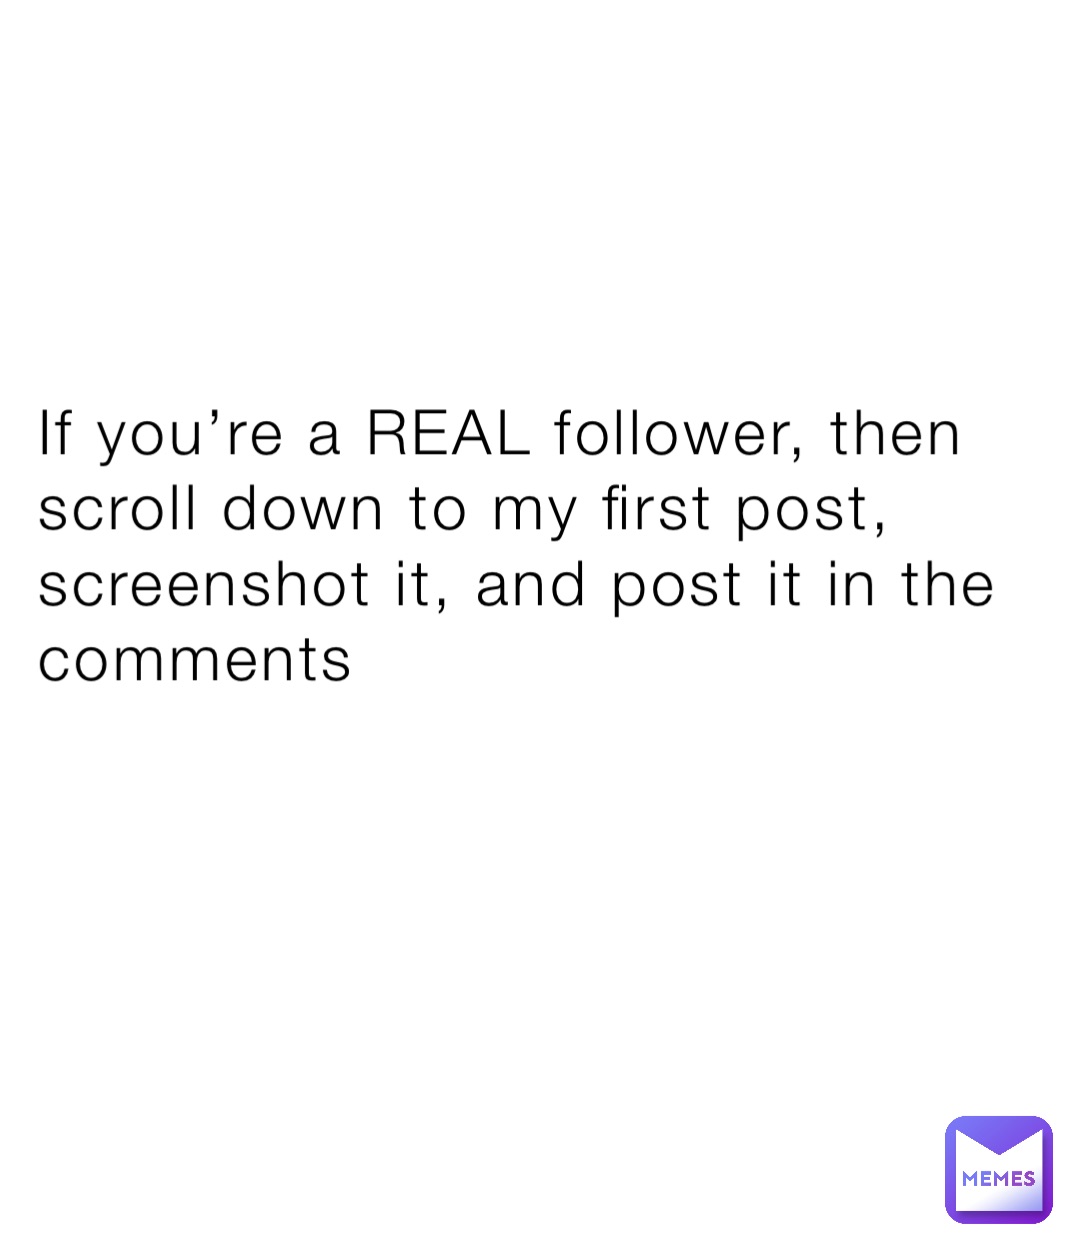 If you’re a REAL follower, then scroll down to my first post, screenshot it, and post it in the comments